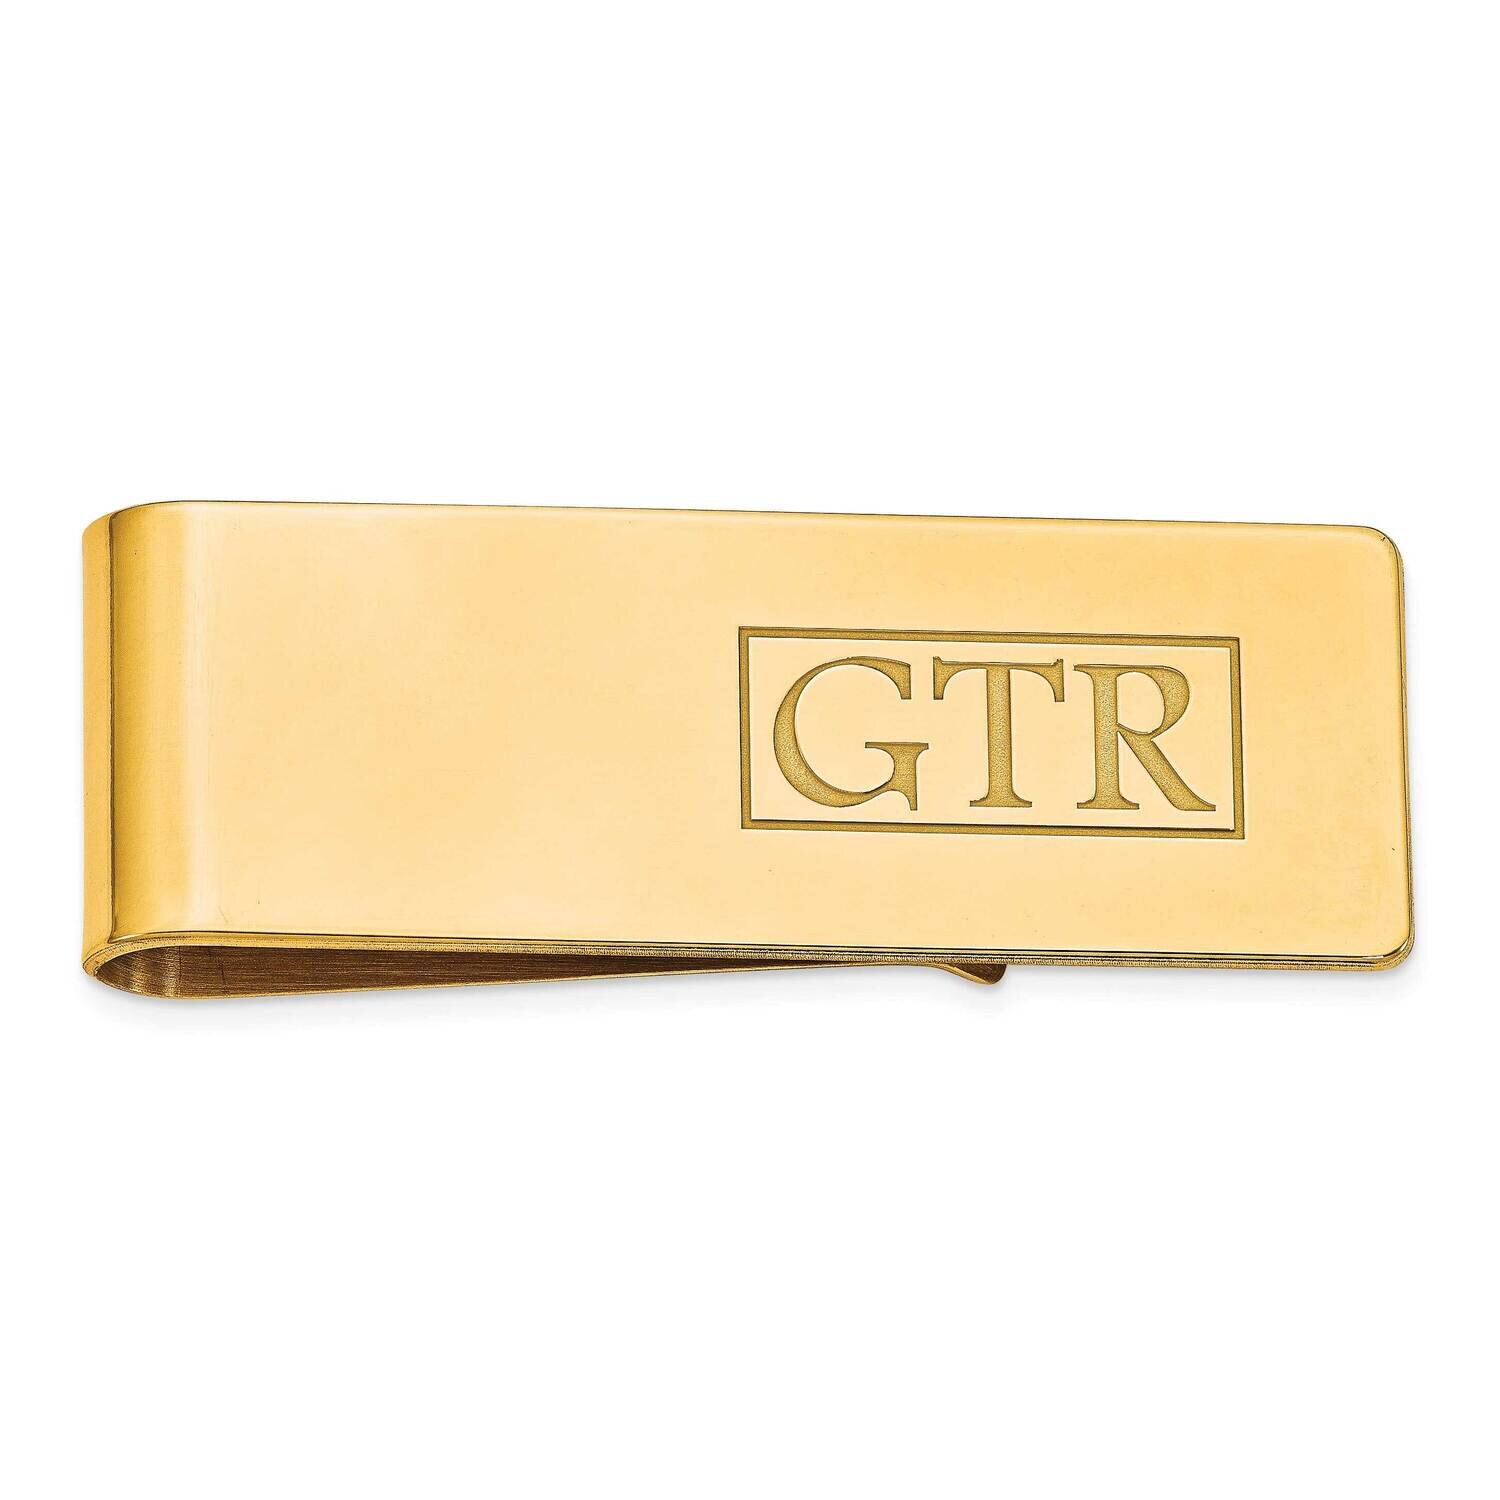 Recessed Letters Polished Monogram Money Clip Gold-plated Silver XNA605GP